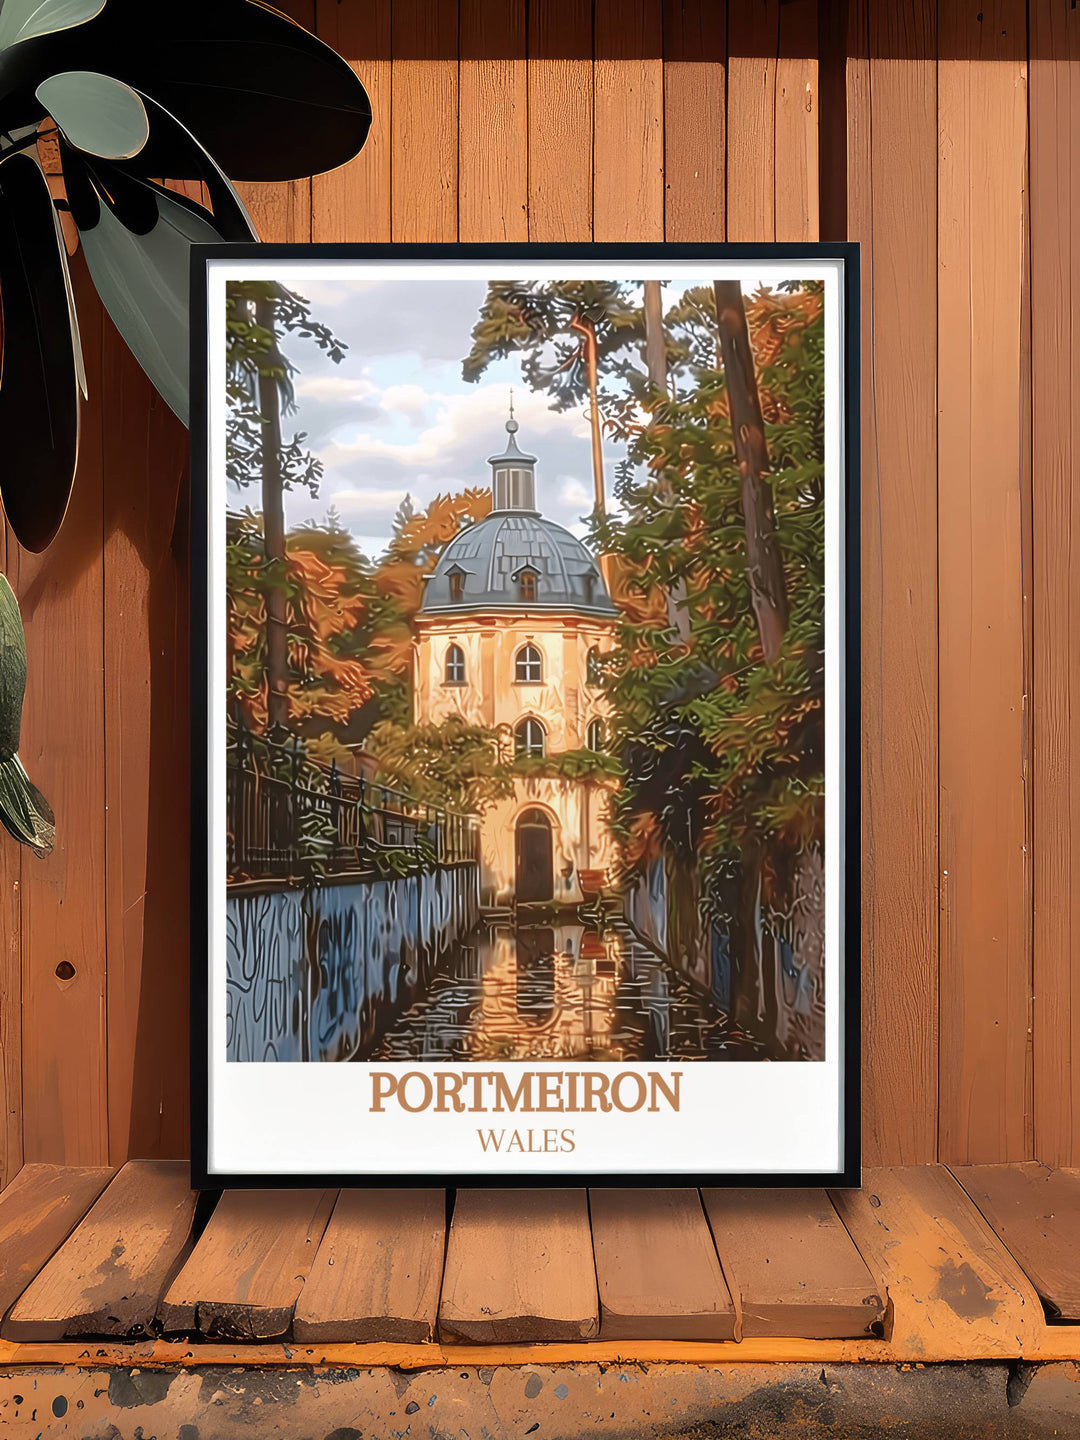 Wales Prints offer a captivating view of Portmeirion, designed by Sir Clough Williams Ellis. These travel posters are ideal for home living decor and make thoughtful gifts for those who appreciate Welsh art.